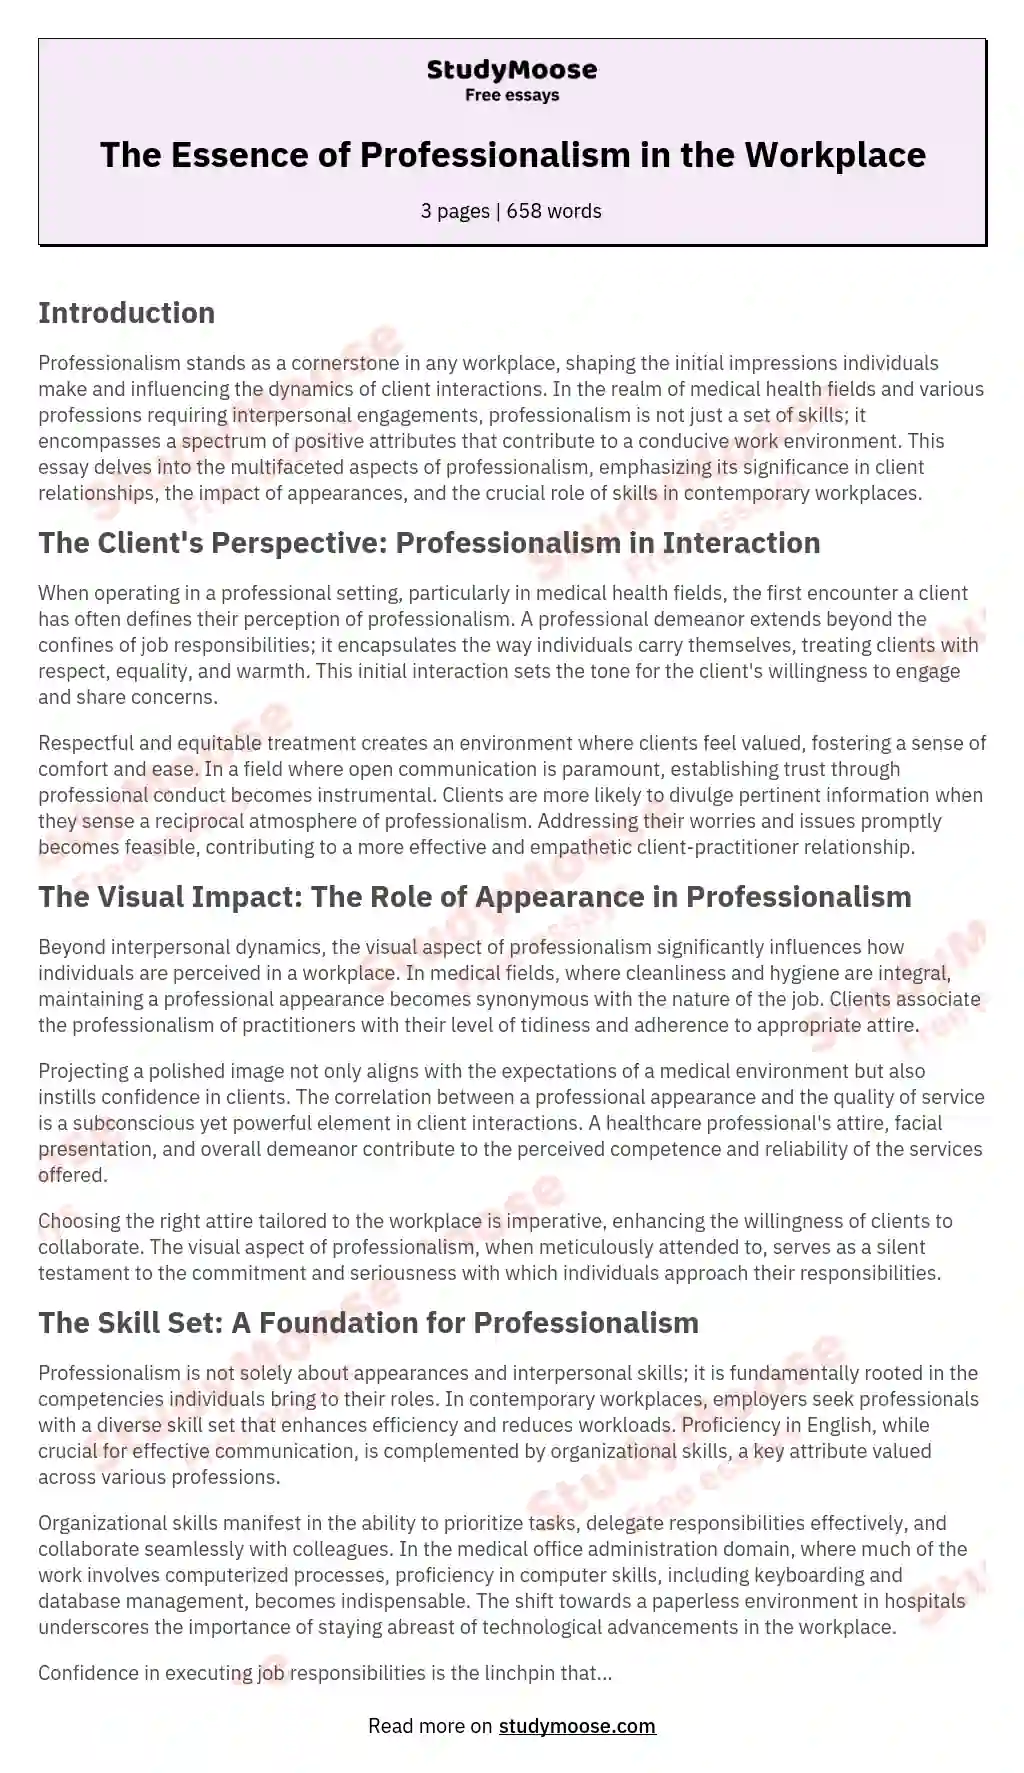 The Essence of Professionalism in the Workplace essay